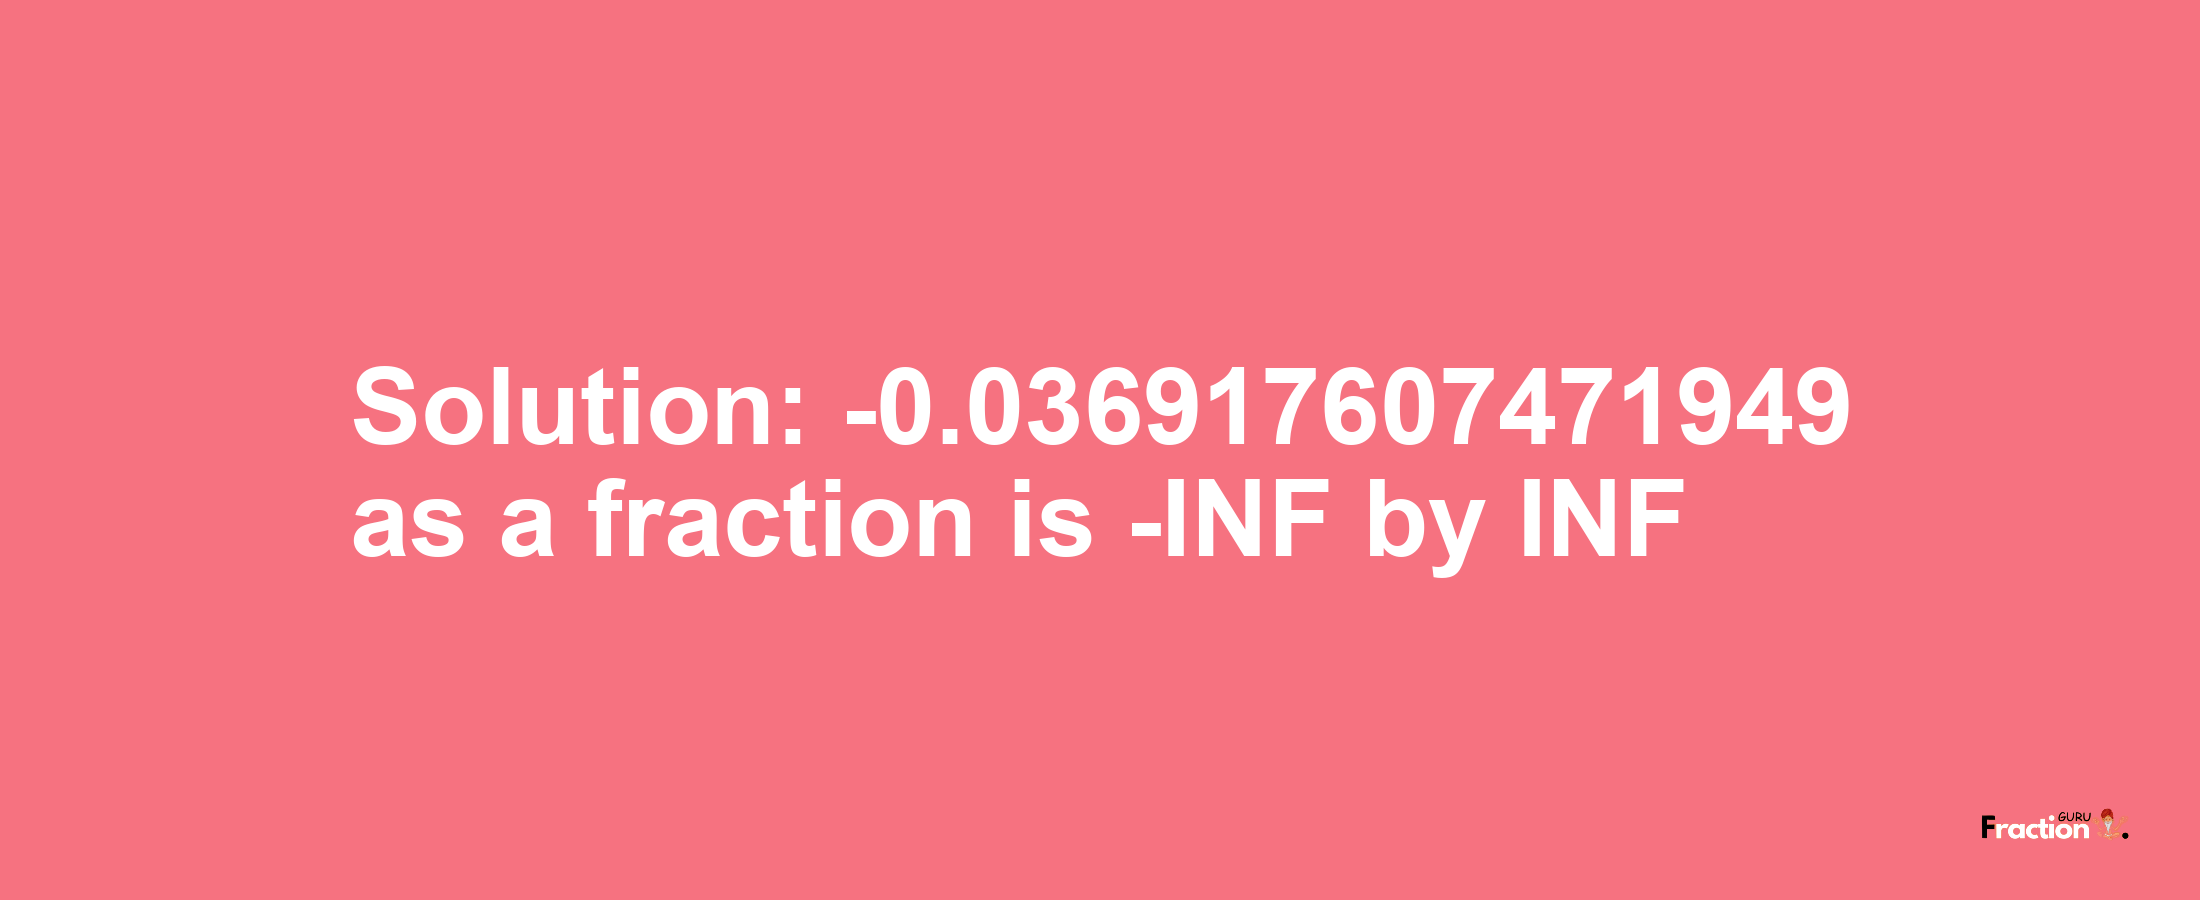 Solution:-0.036917607471949 as a fraction is -INF/INF